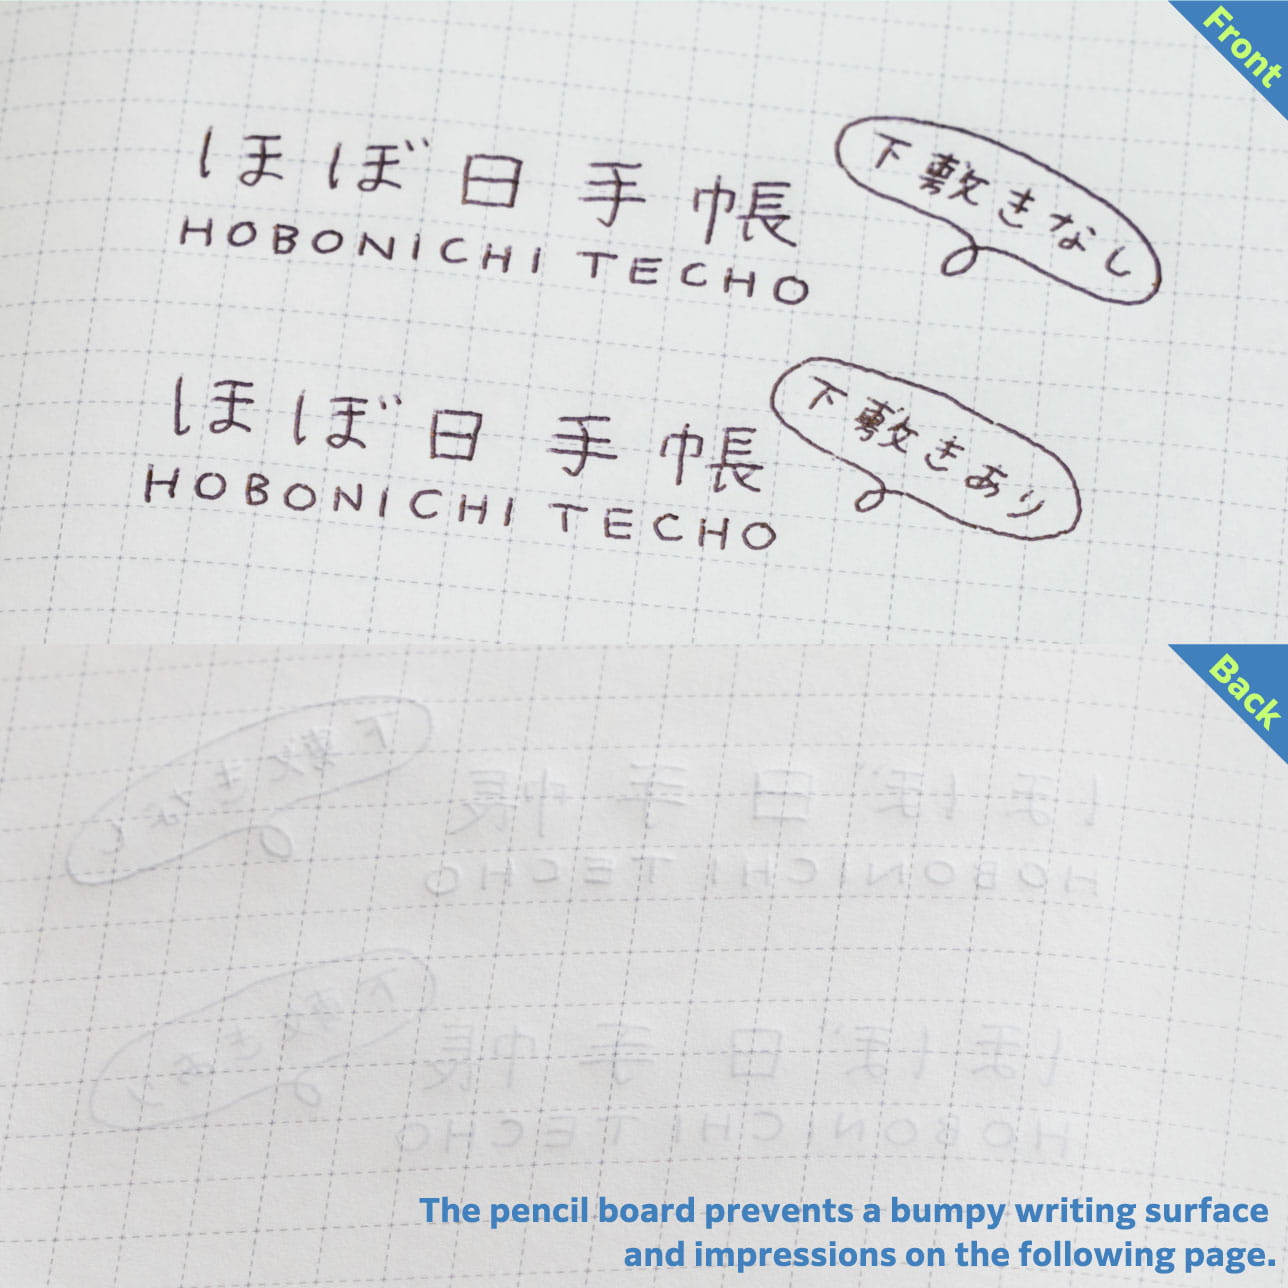 The pencil board prevents a bumpy writing surface and impressions on the following page.